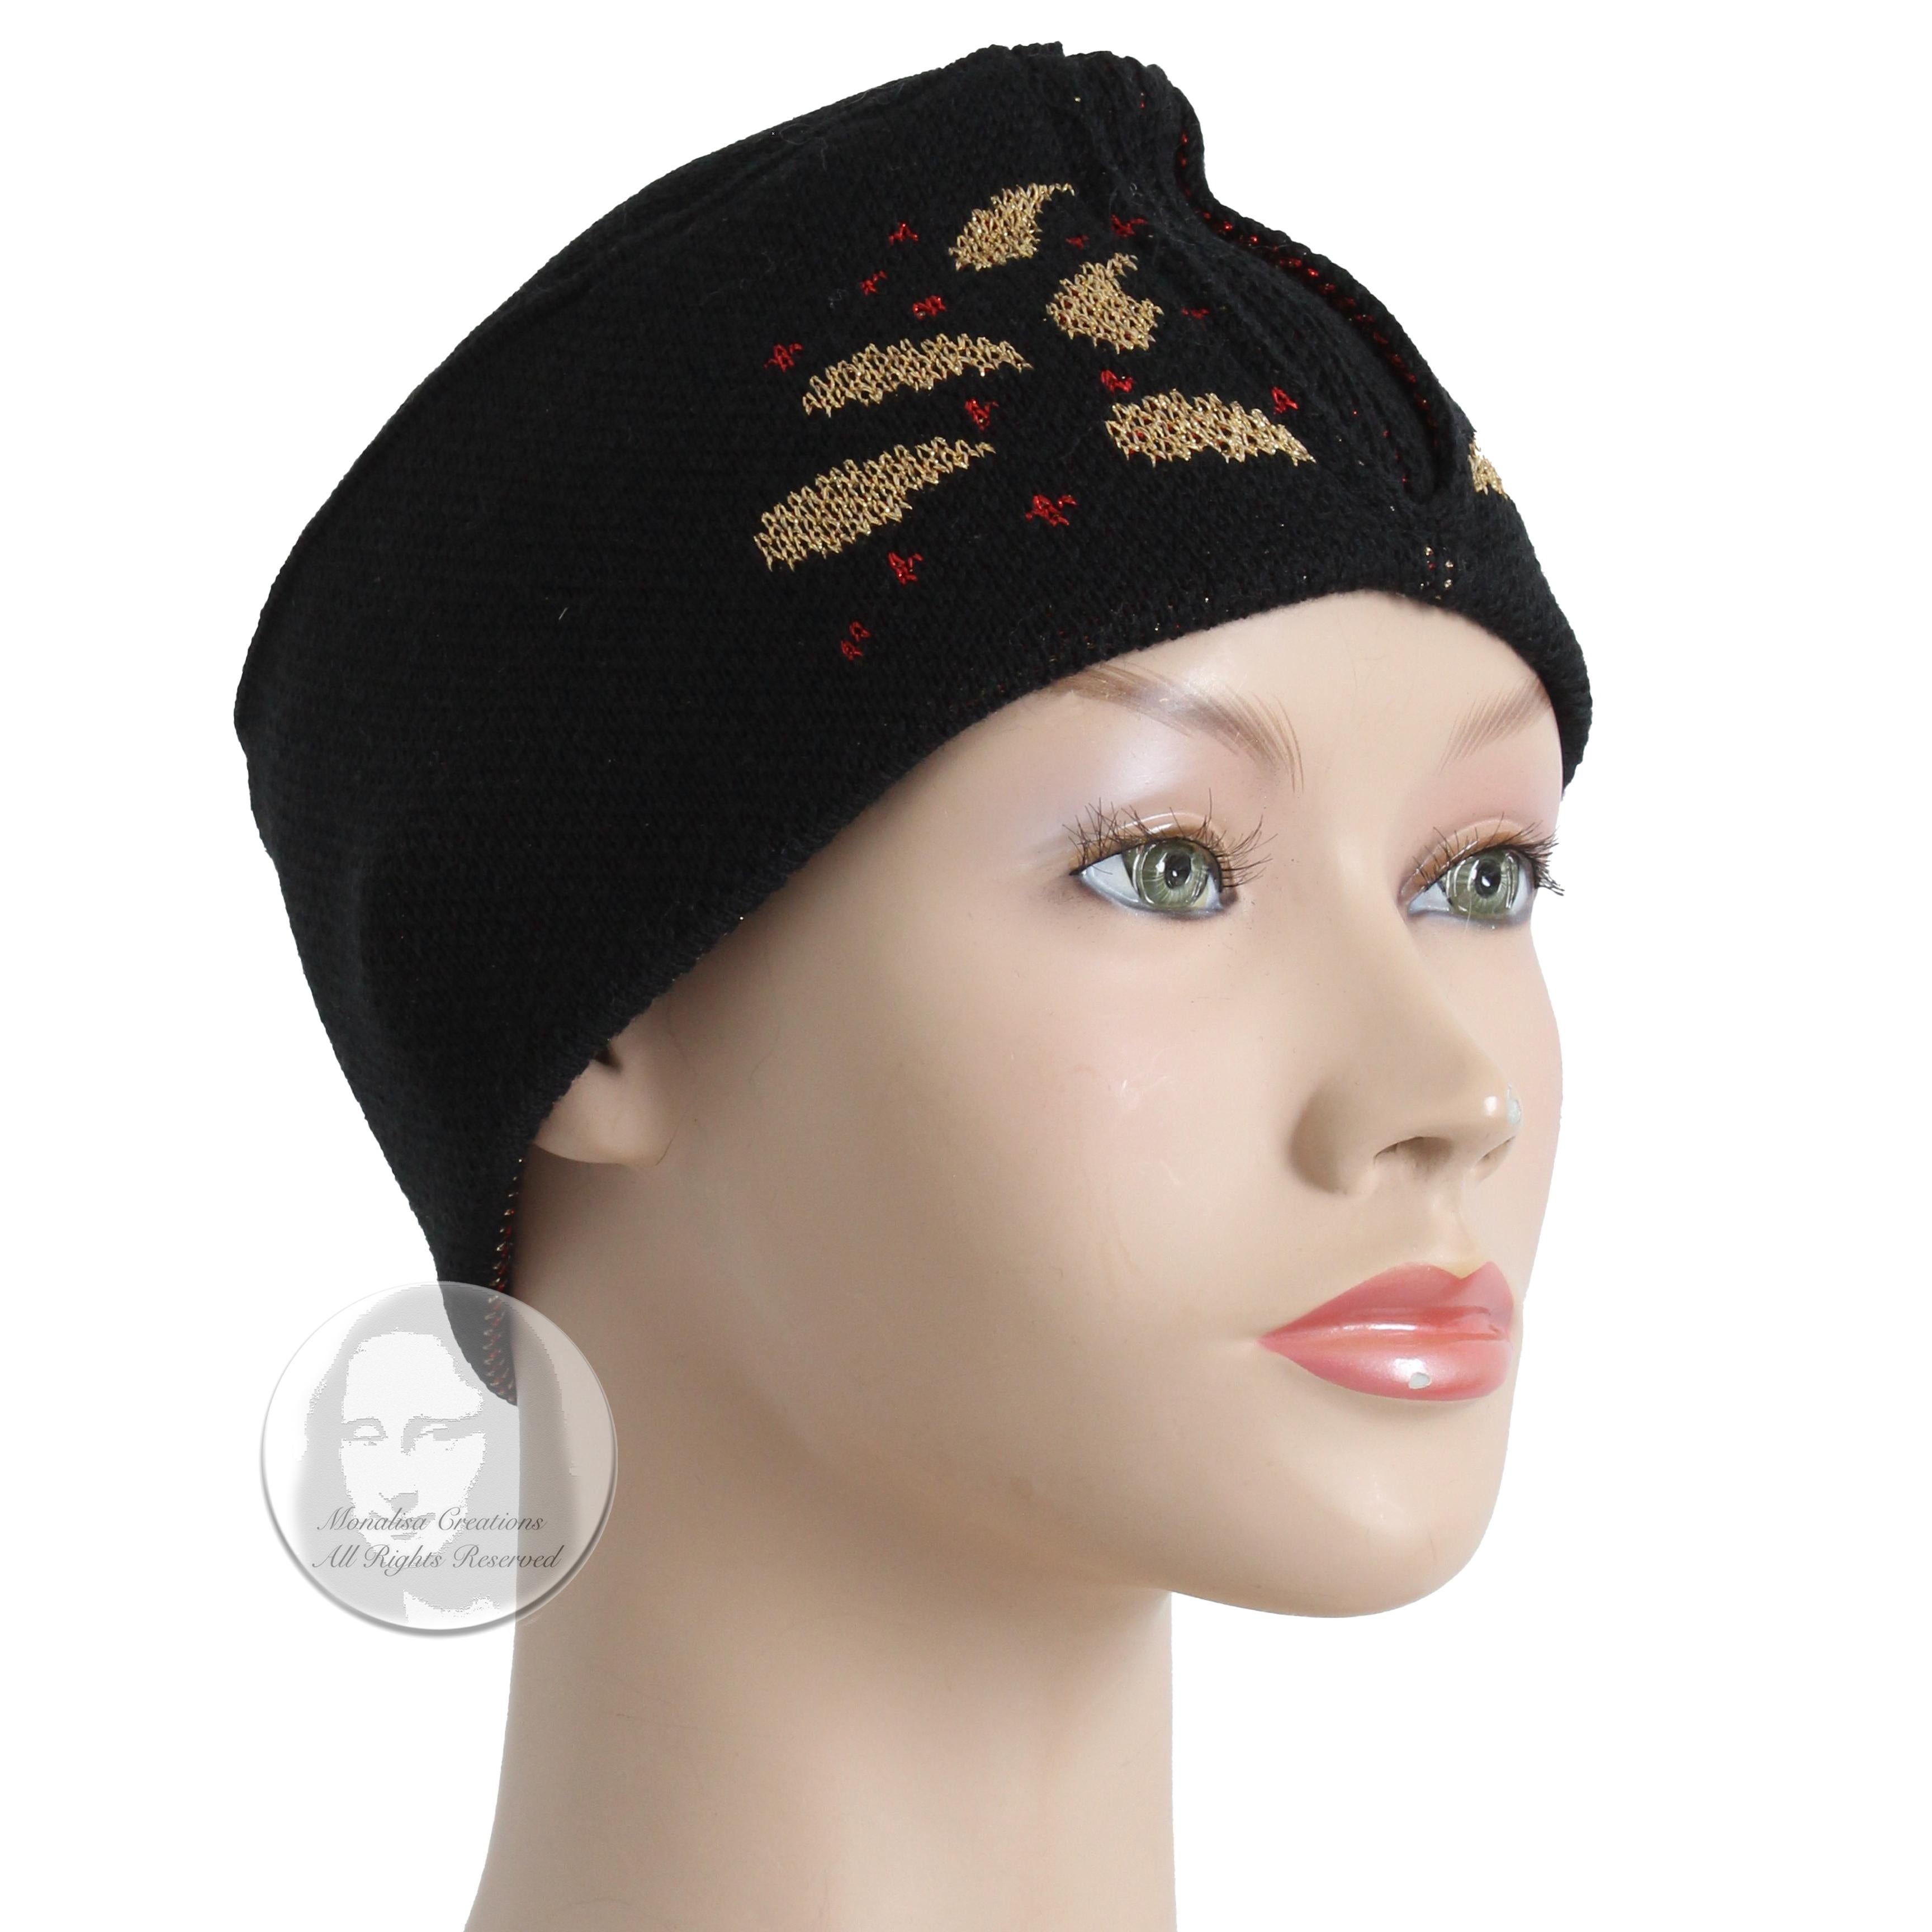 Vintage Yves Saint Laurent Knit Hat Cap Black Gold Red Metallic Paisley Rare  In Good Condition For Sale In Port Saint Lucie, FL